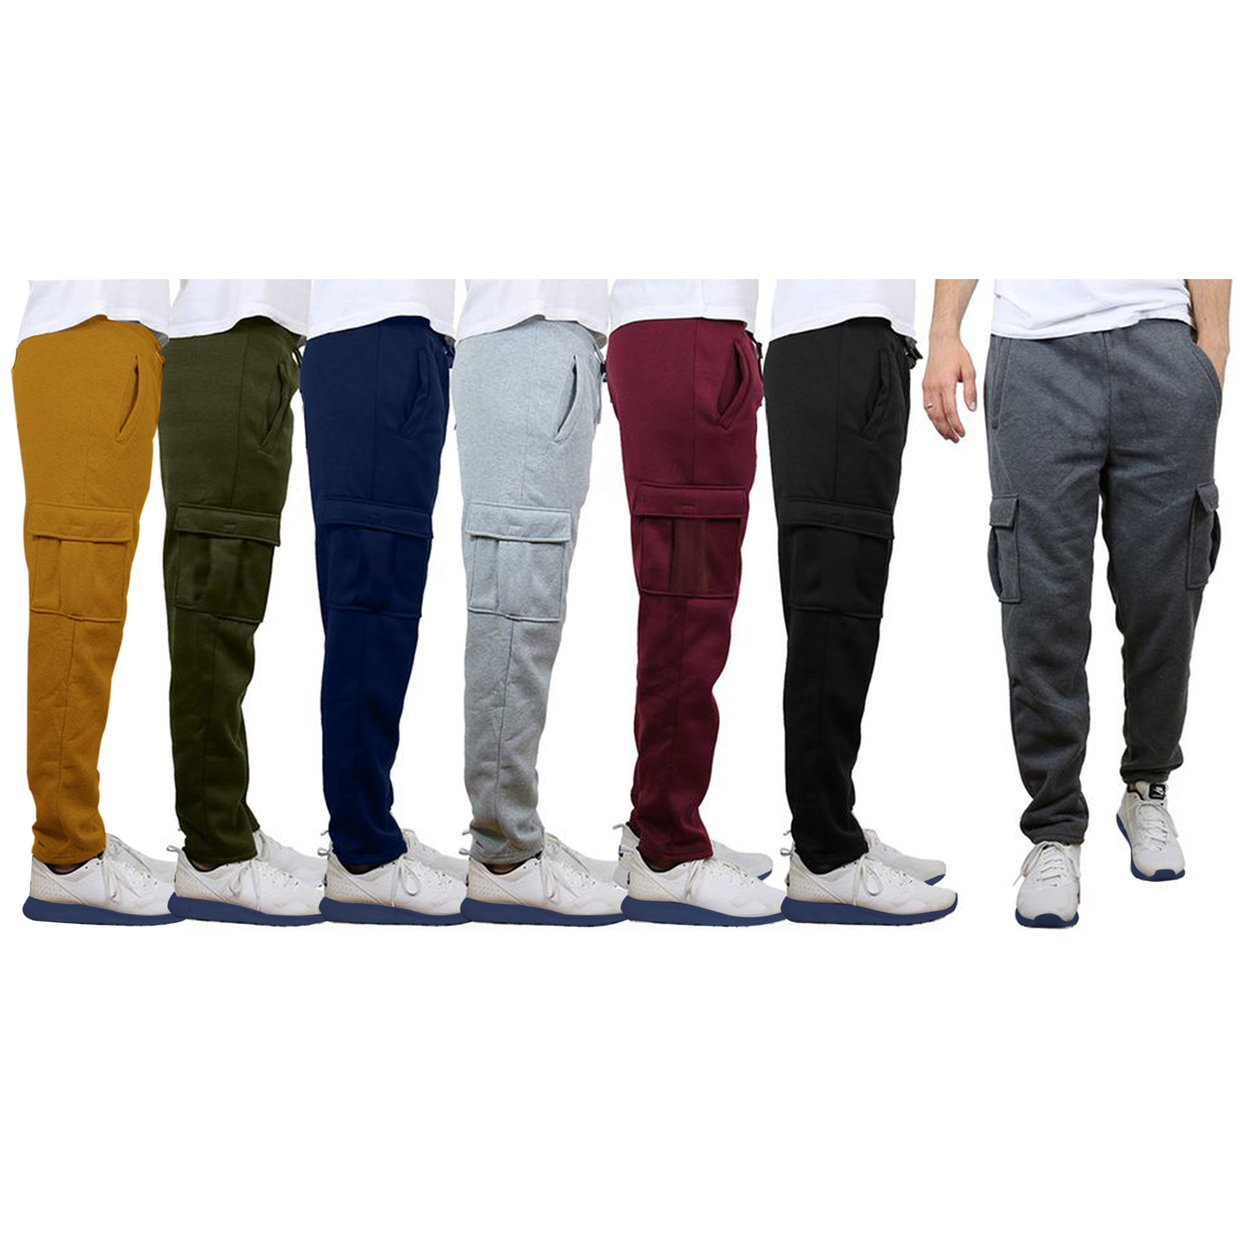 Multipack Men's Casual Solid Cargo Jogger Sweatpants With Pockets - 1, L